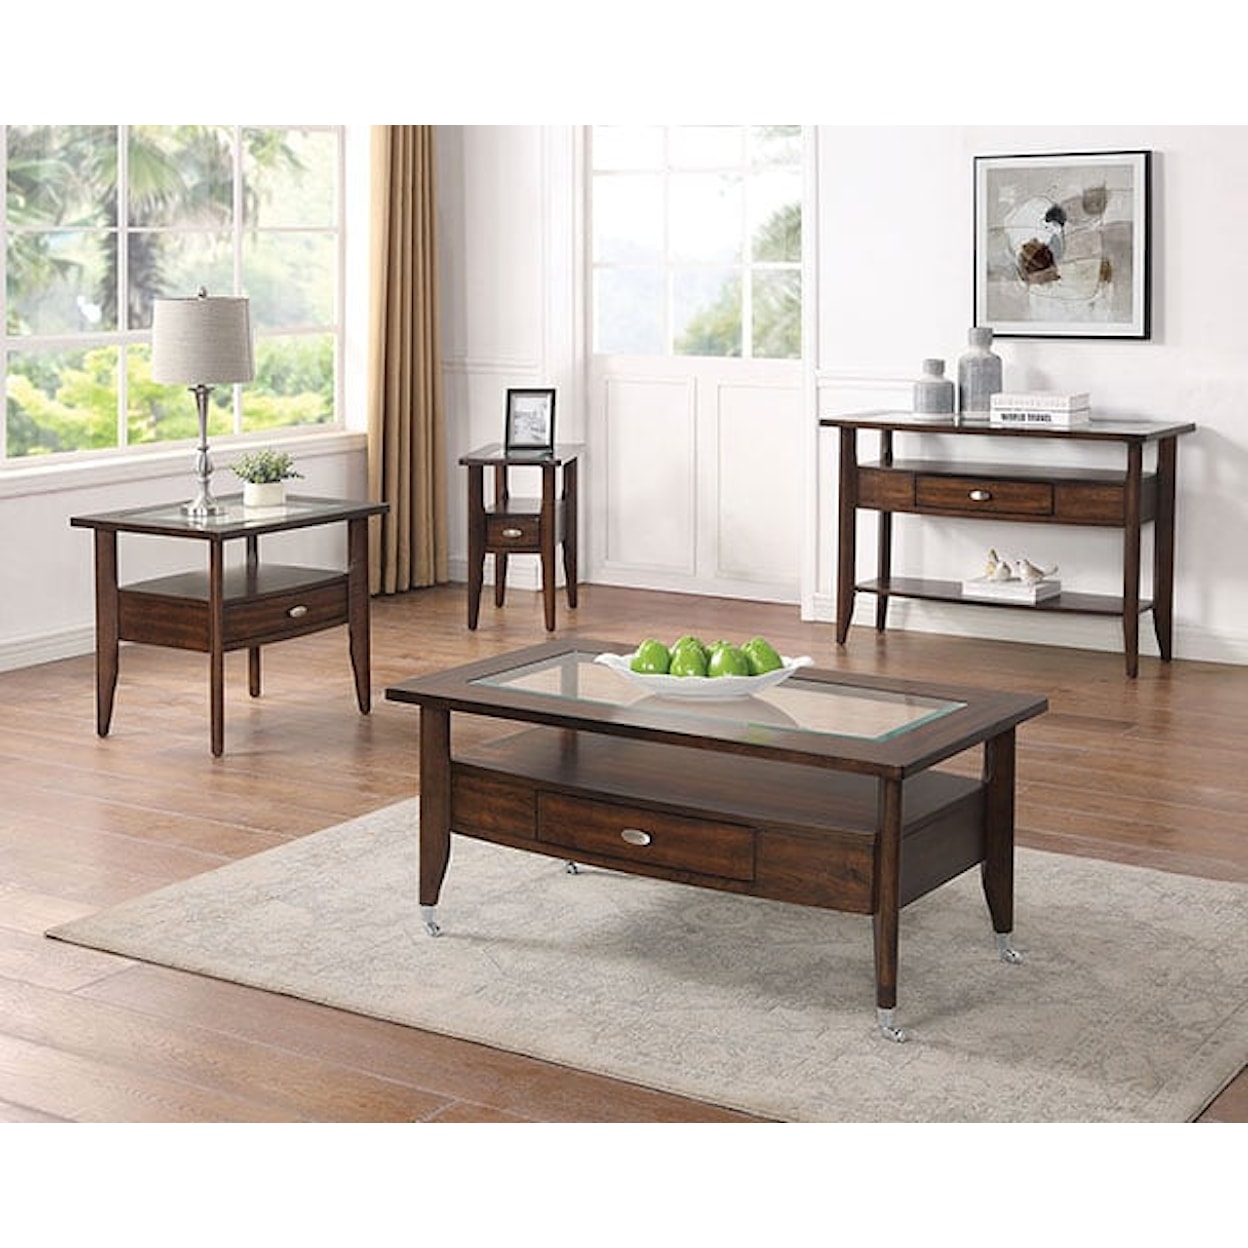 Furniture of America Riverdale Dark Walnut Side Table with Glass Top